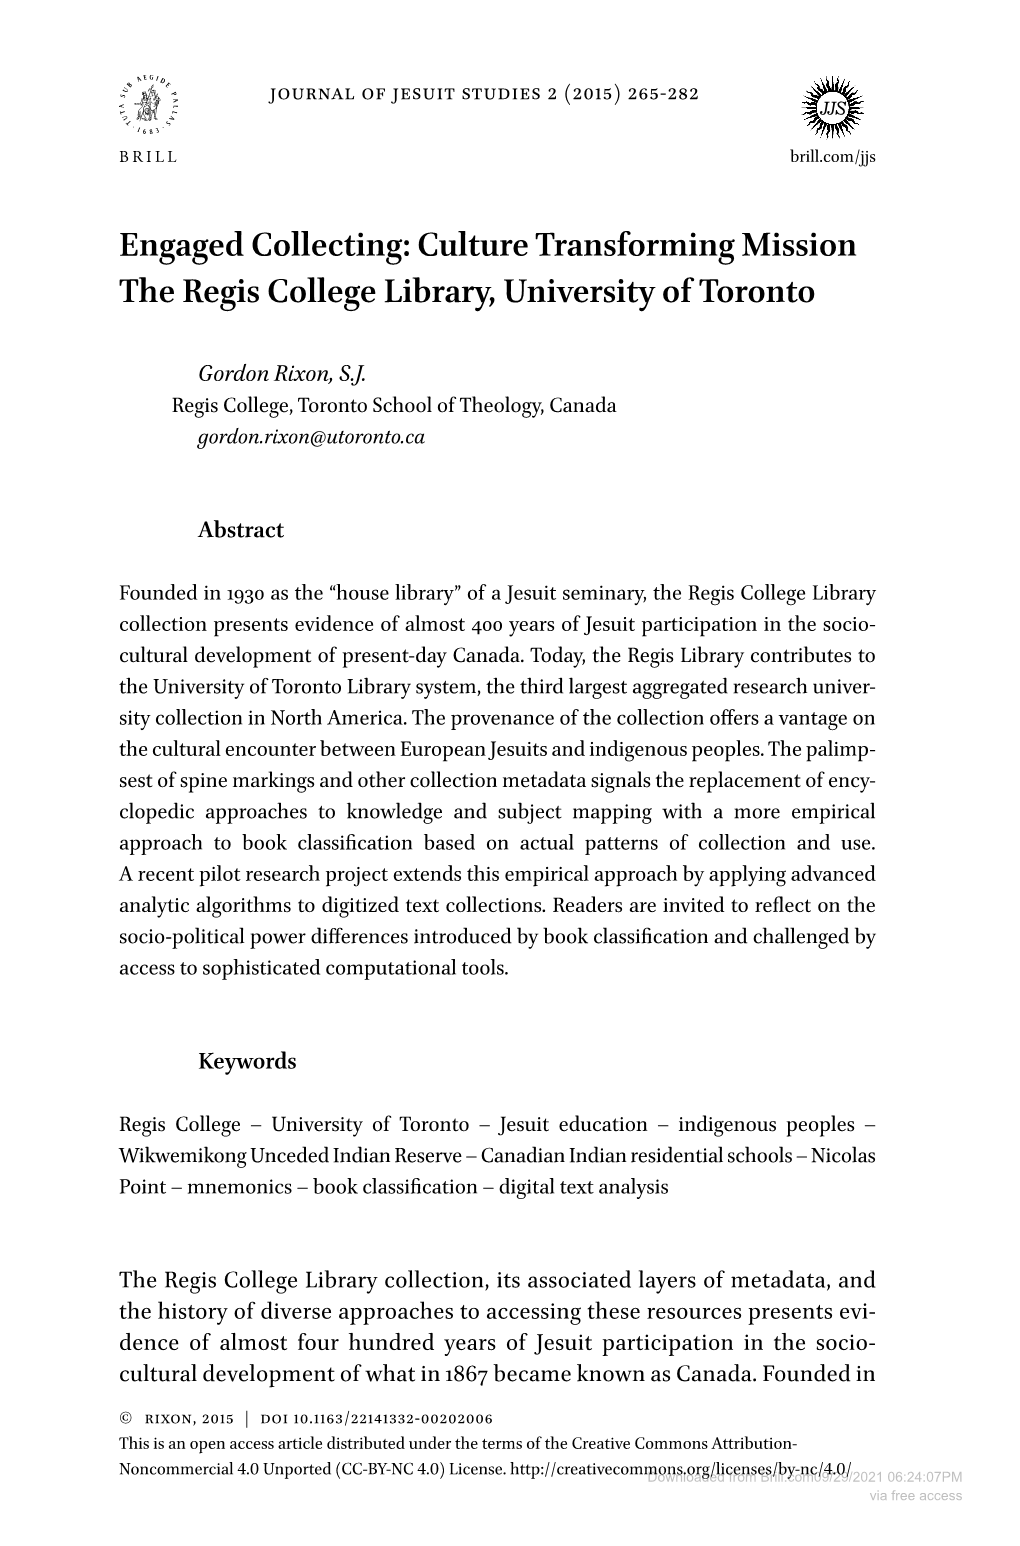 Engaged Collecting: Culture Transforming Mission the Regis College Library, University of Toronto